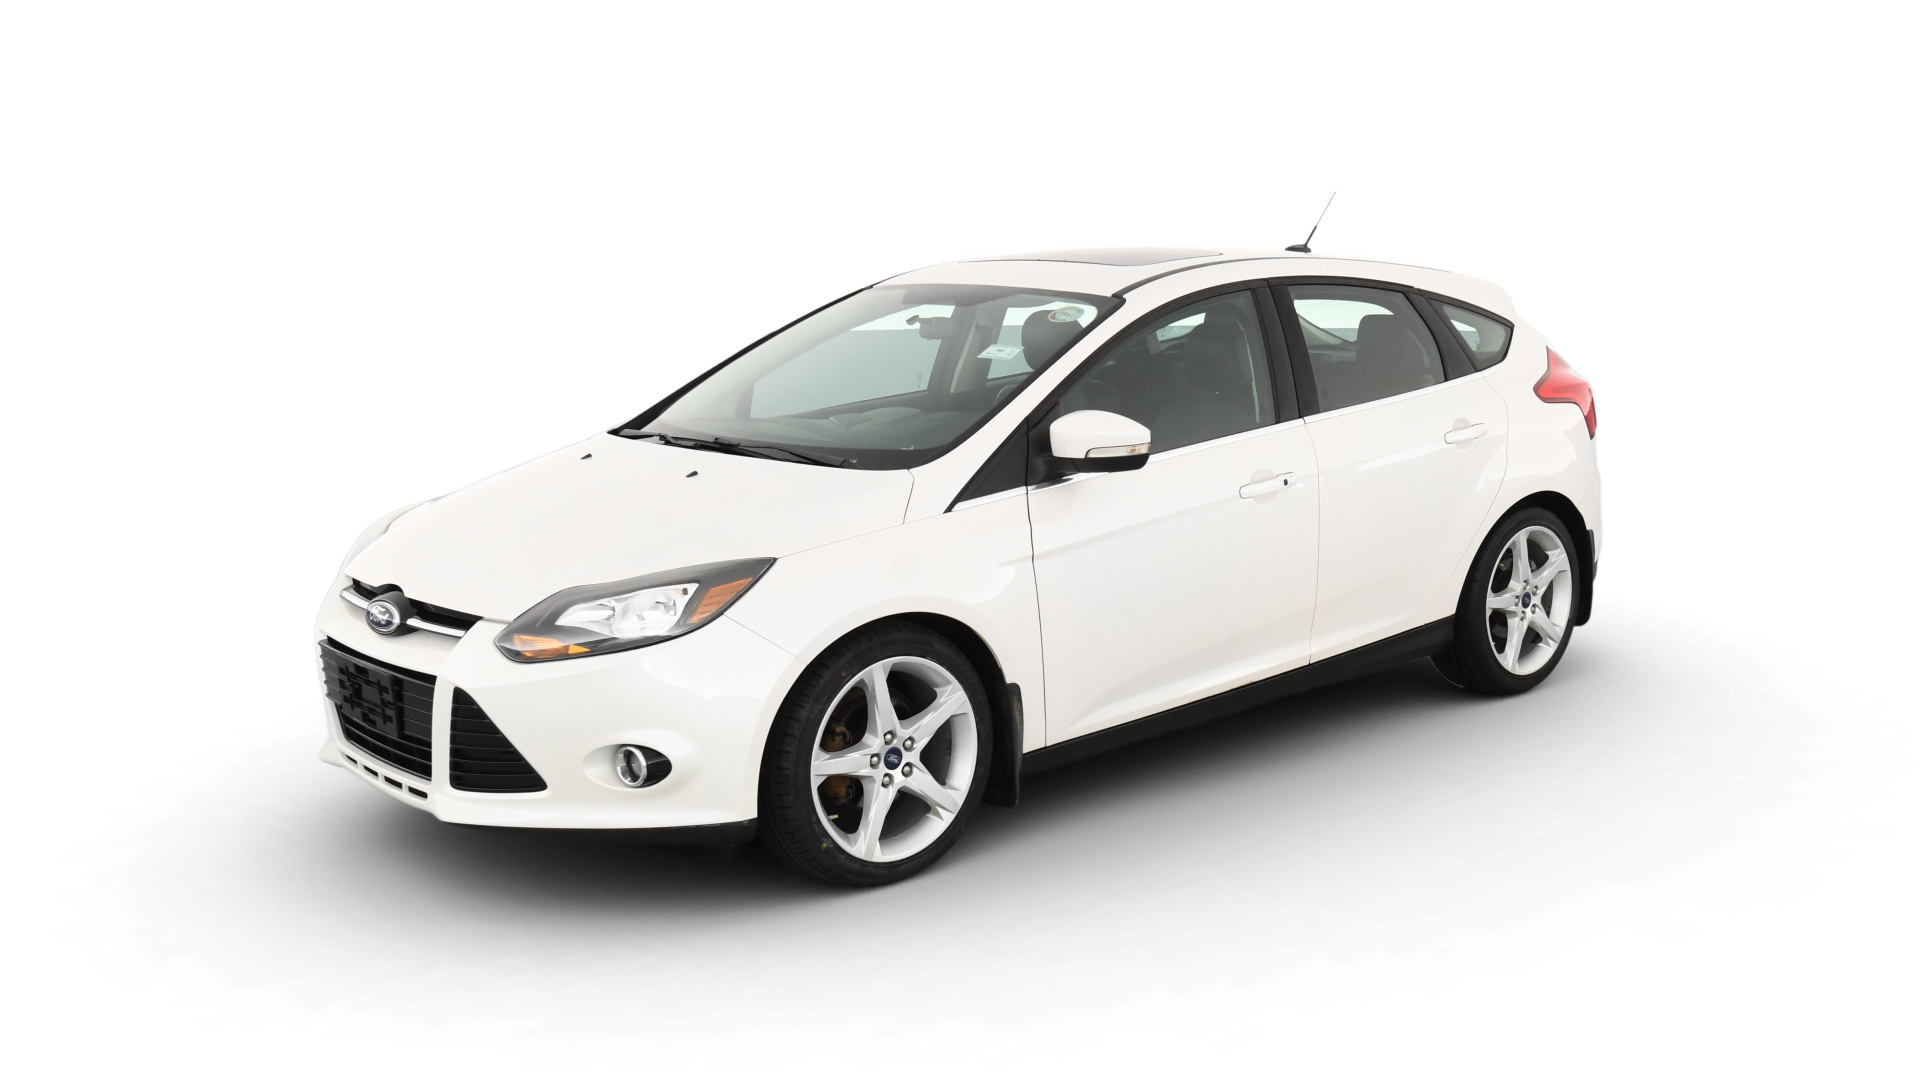 Ford Focus Electric model image.